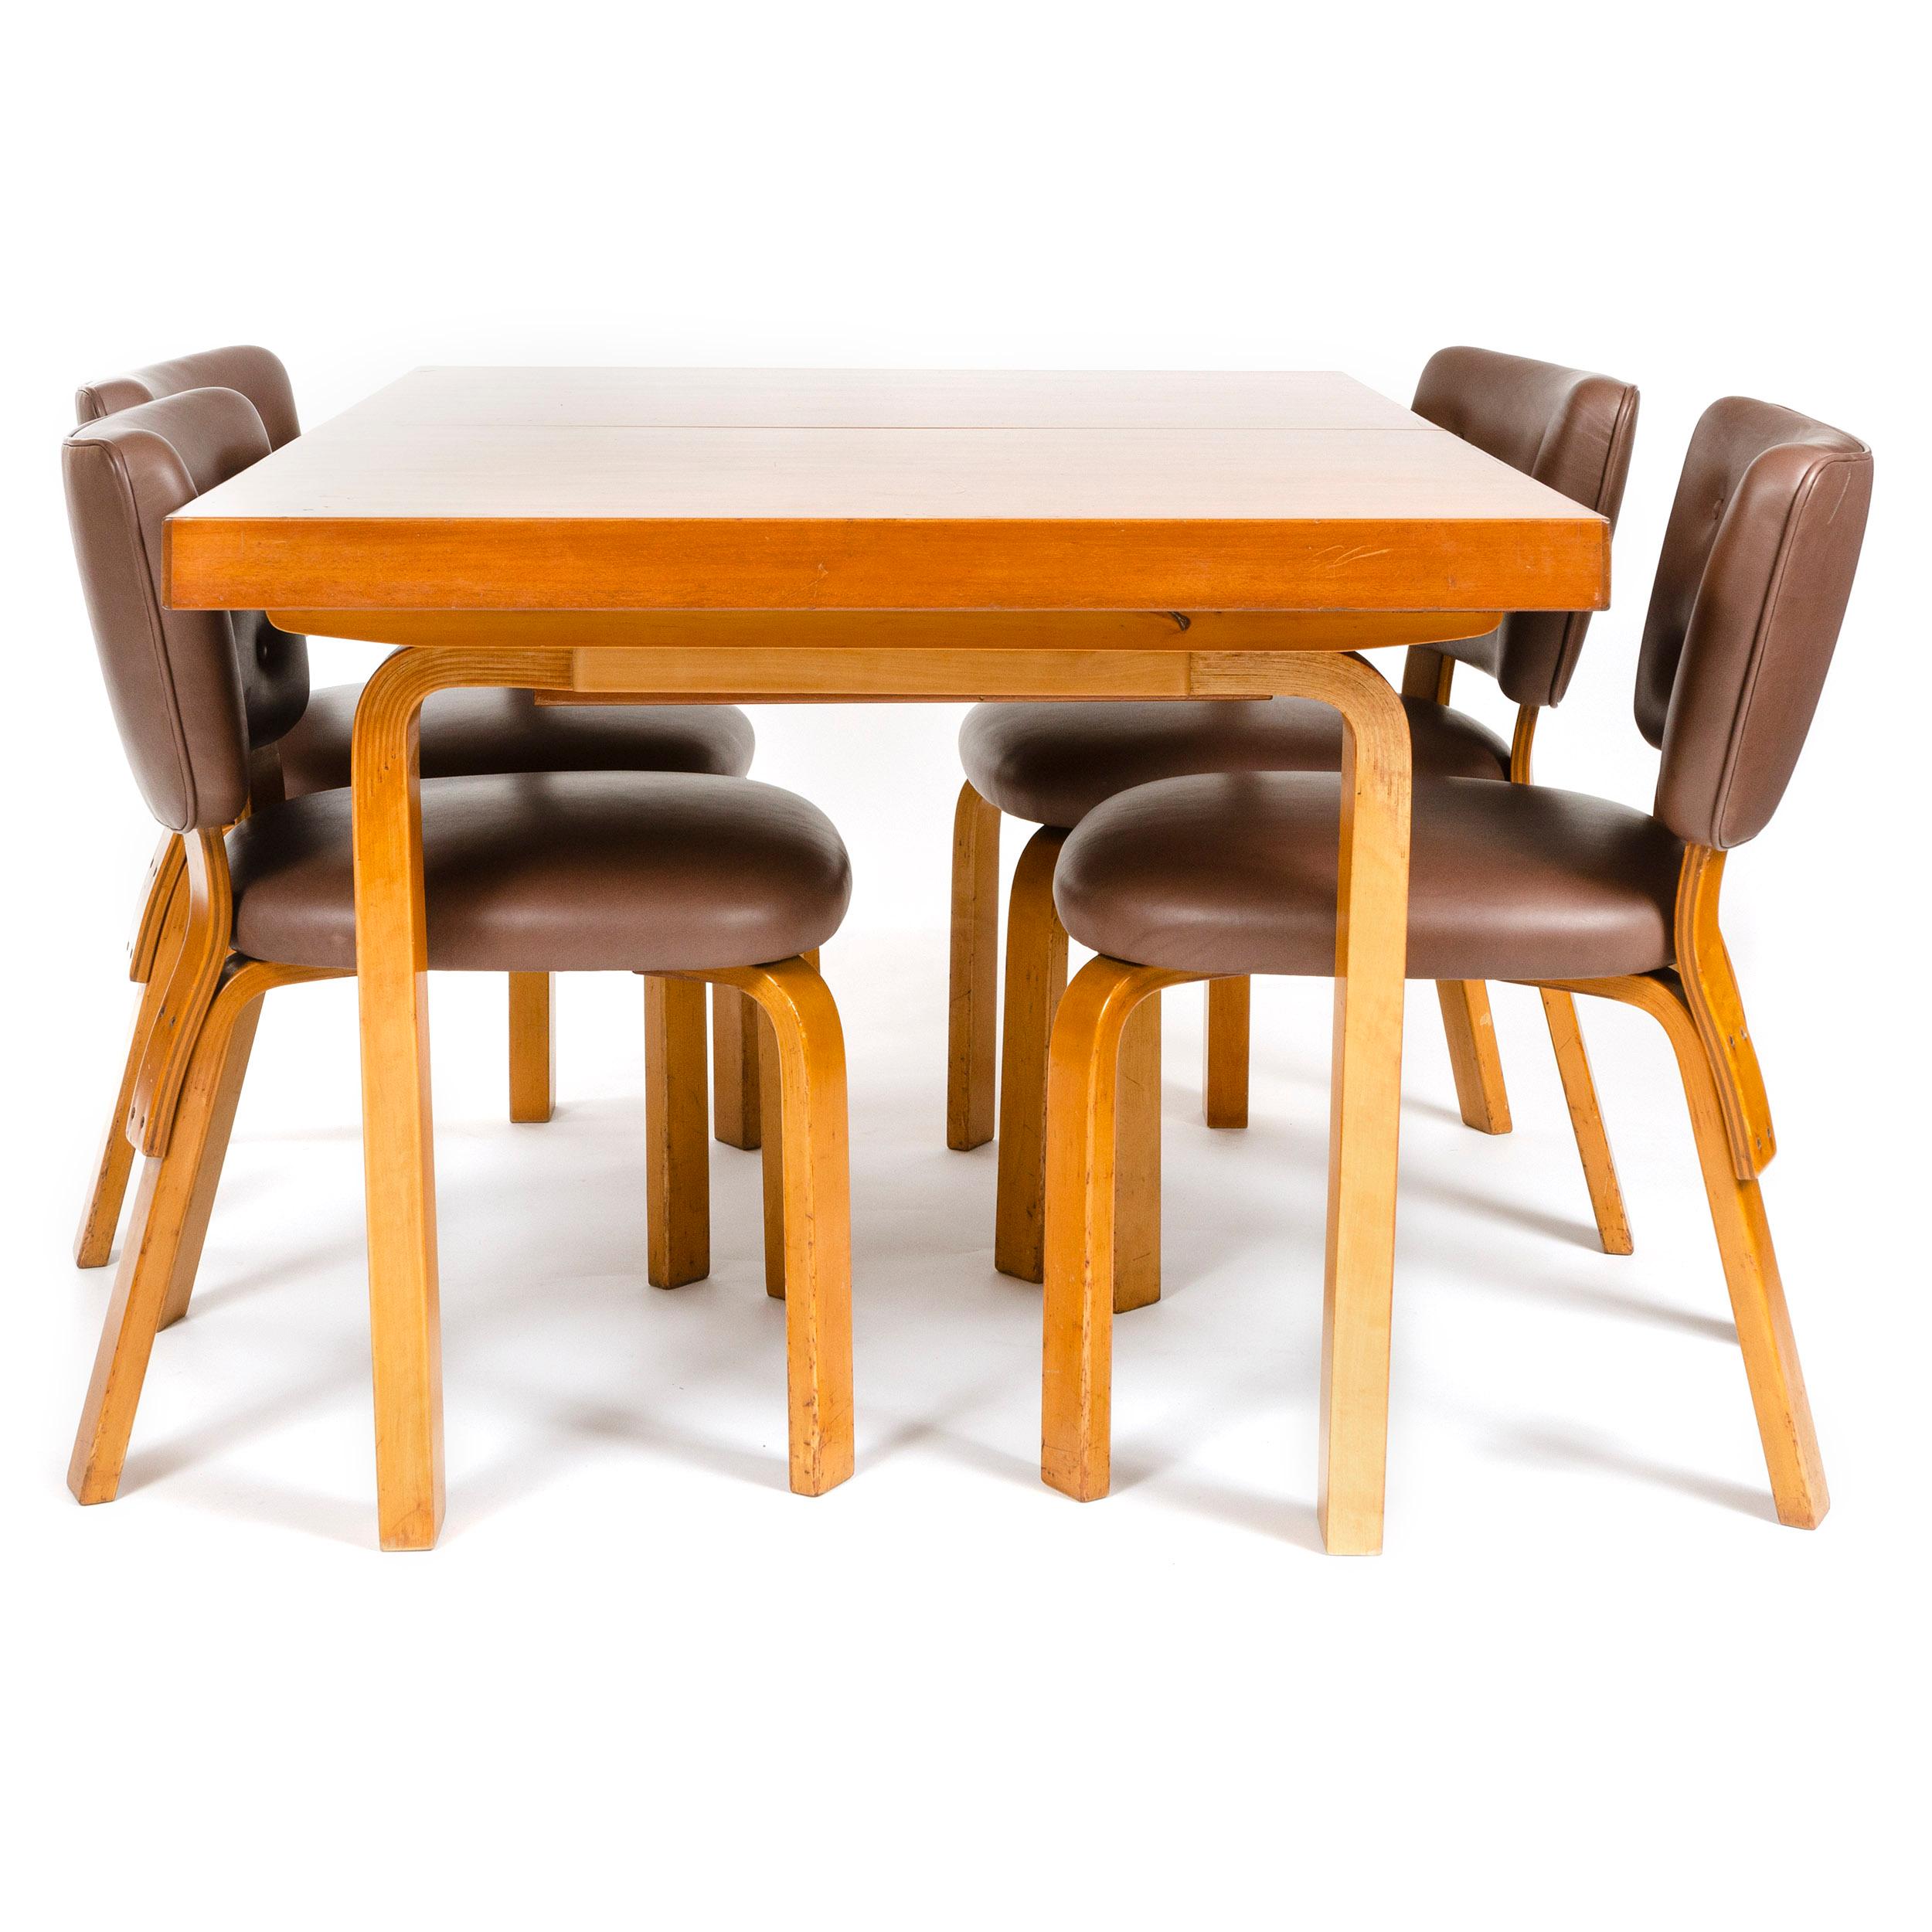 1940s Finnish Set of Four Upholstered Dining Chairs by Alvar Aalto for Artek In Good Condition For Sale In Sagaponack, NY